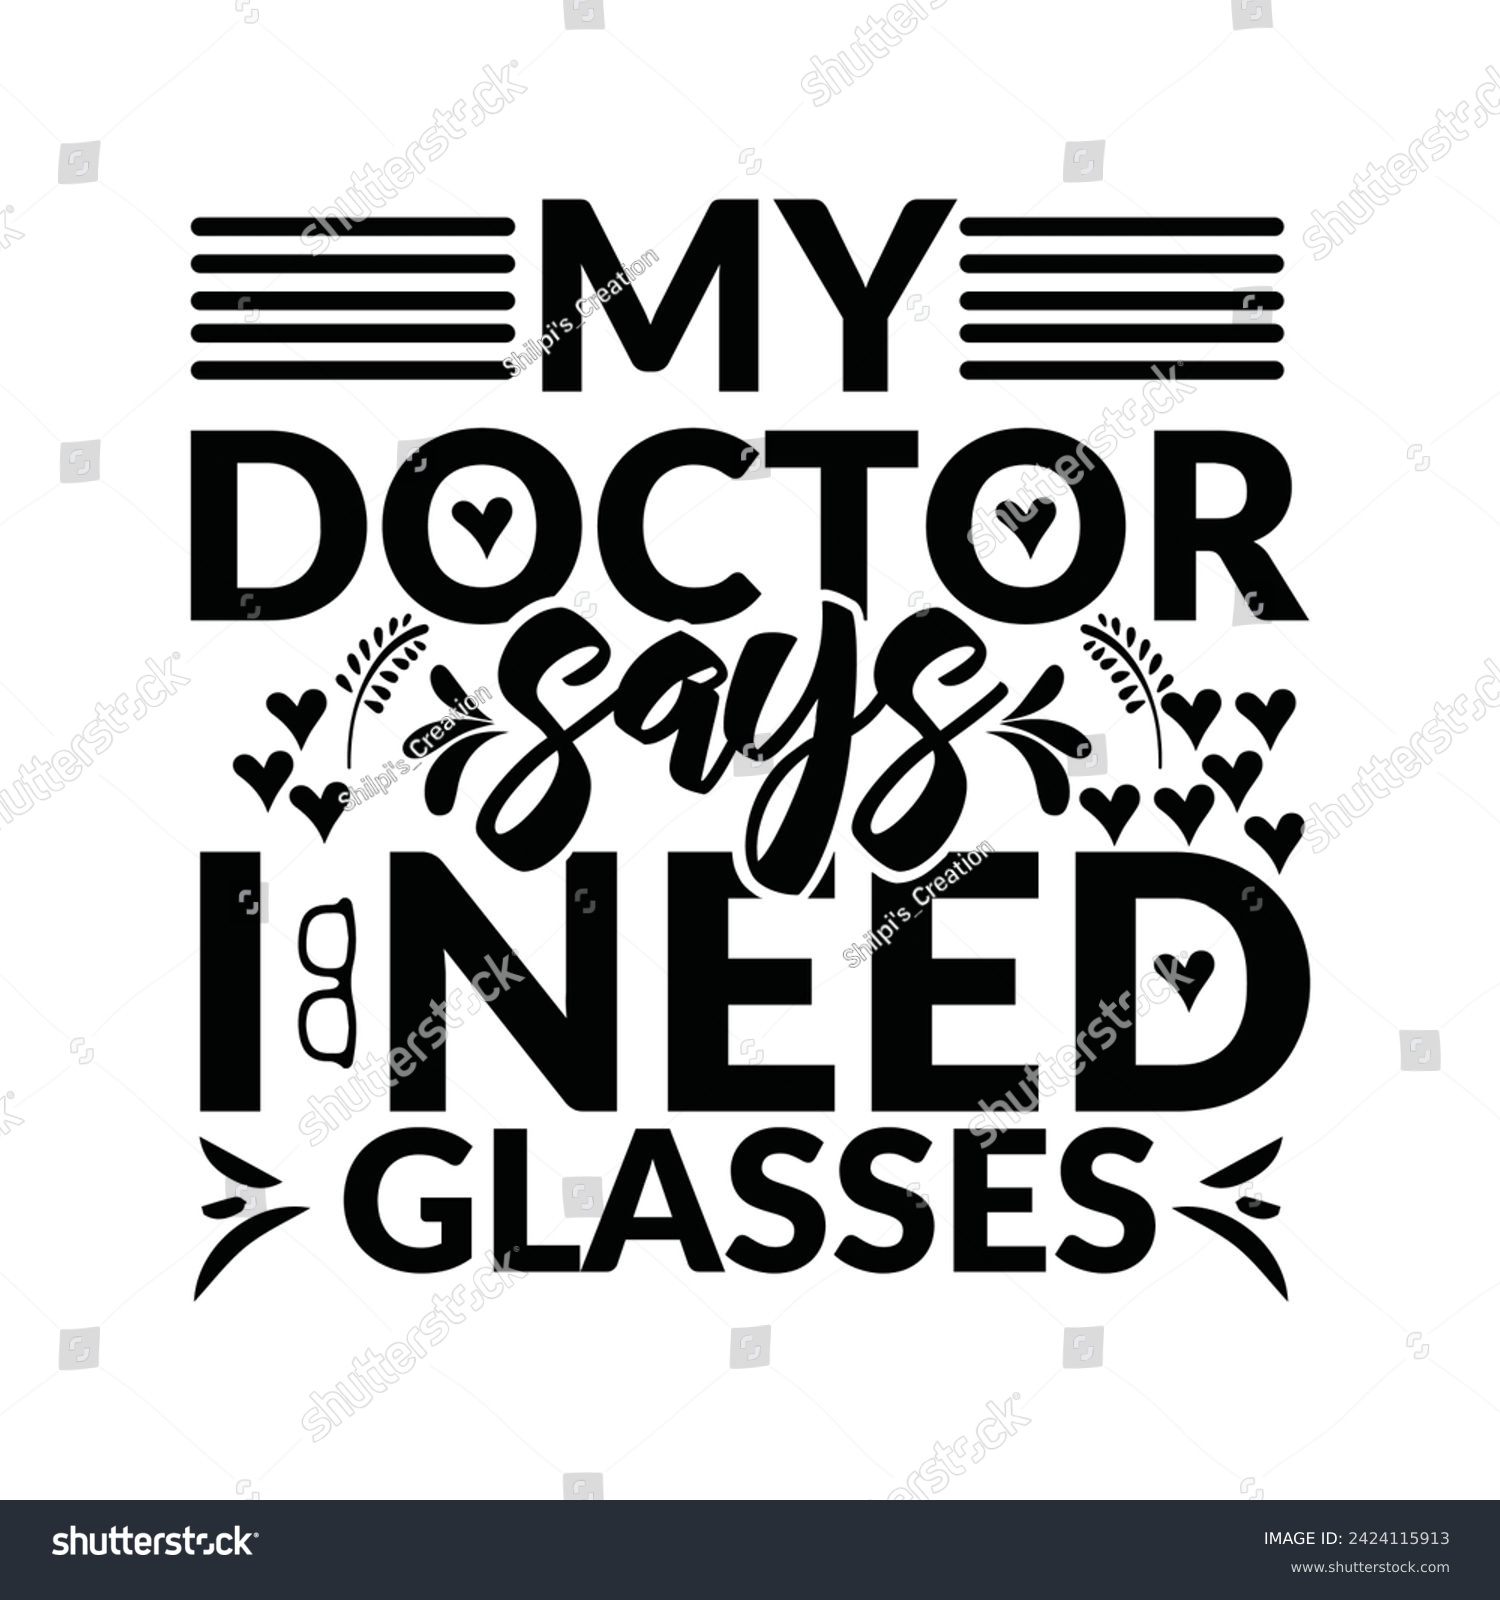 SVG of My doctor says I need glasses, my doctor says i need glasses logo inspirational positive quotes, motivational, typography, lettering design, My Doctor Says I Need Glasses t-shirt design vector file. svg